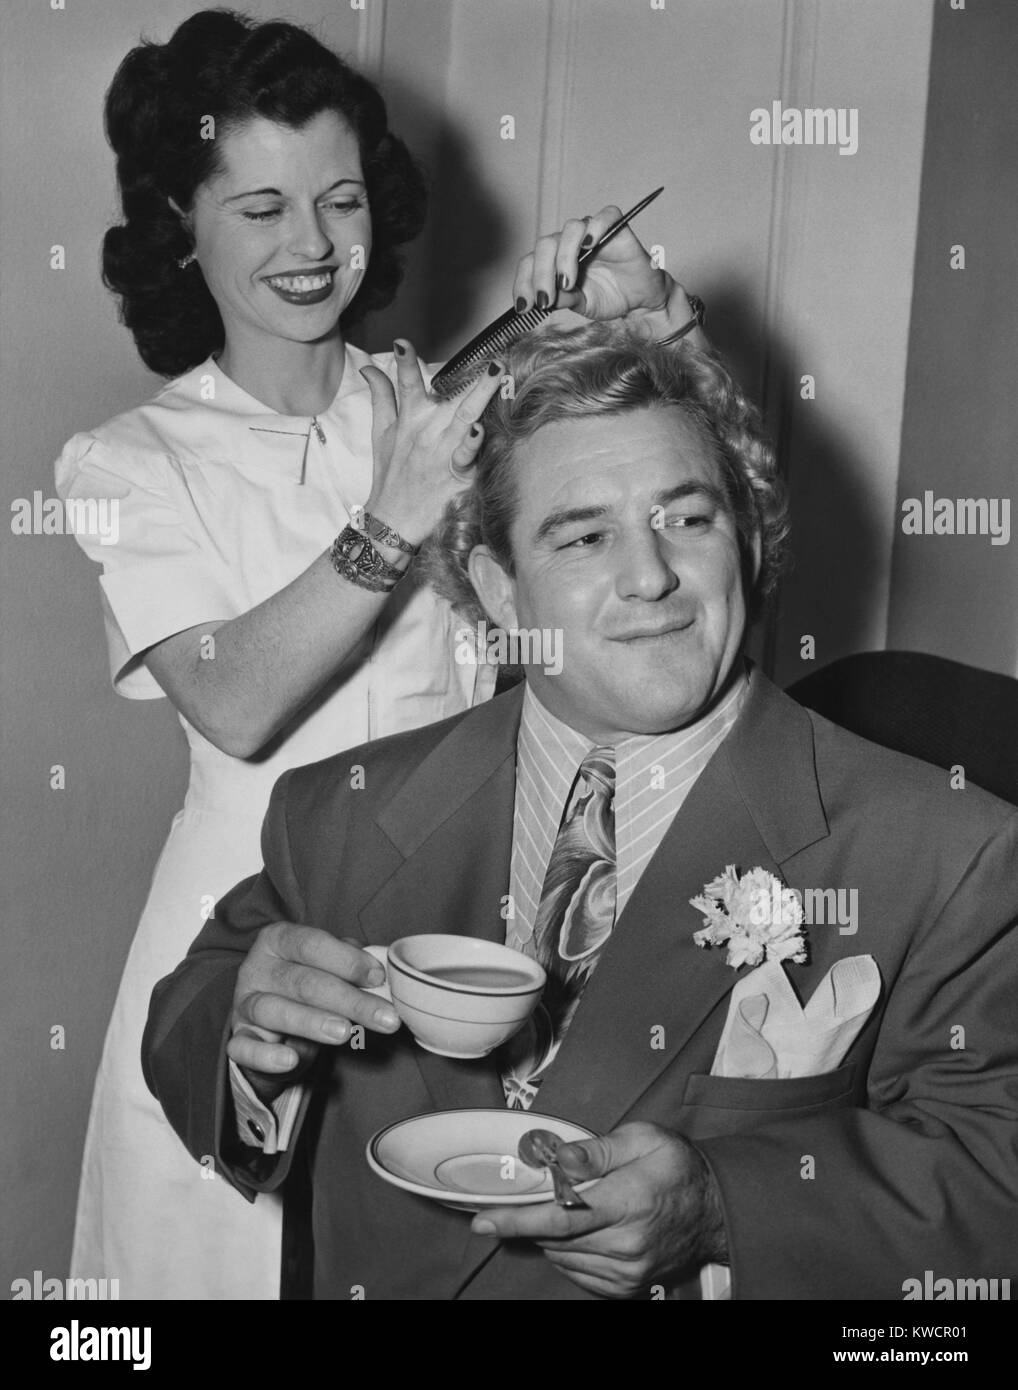 Wrestler Gorgeous George holding a tea cup as his hair is styled by Miss Bettie of Hollywood. Feb. 19, 1949. He appeared in the 1949 movie, ALIAS THE CHAMP. - (BSLOC 2014 17 162) Stock Photo